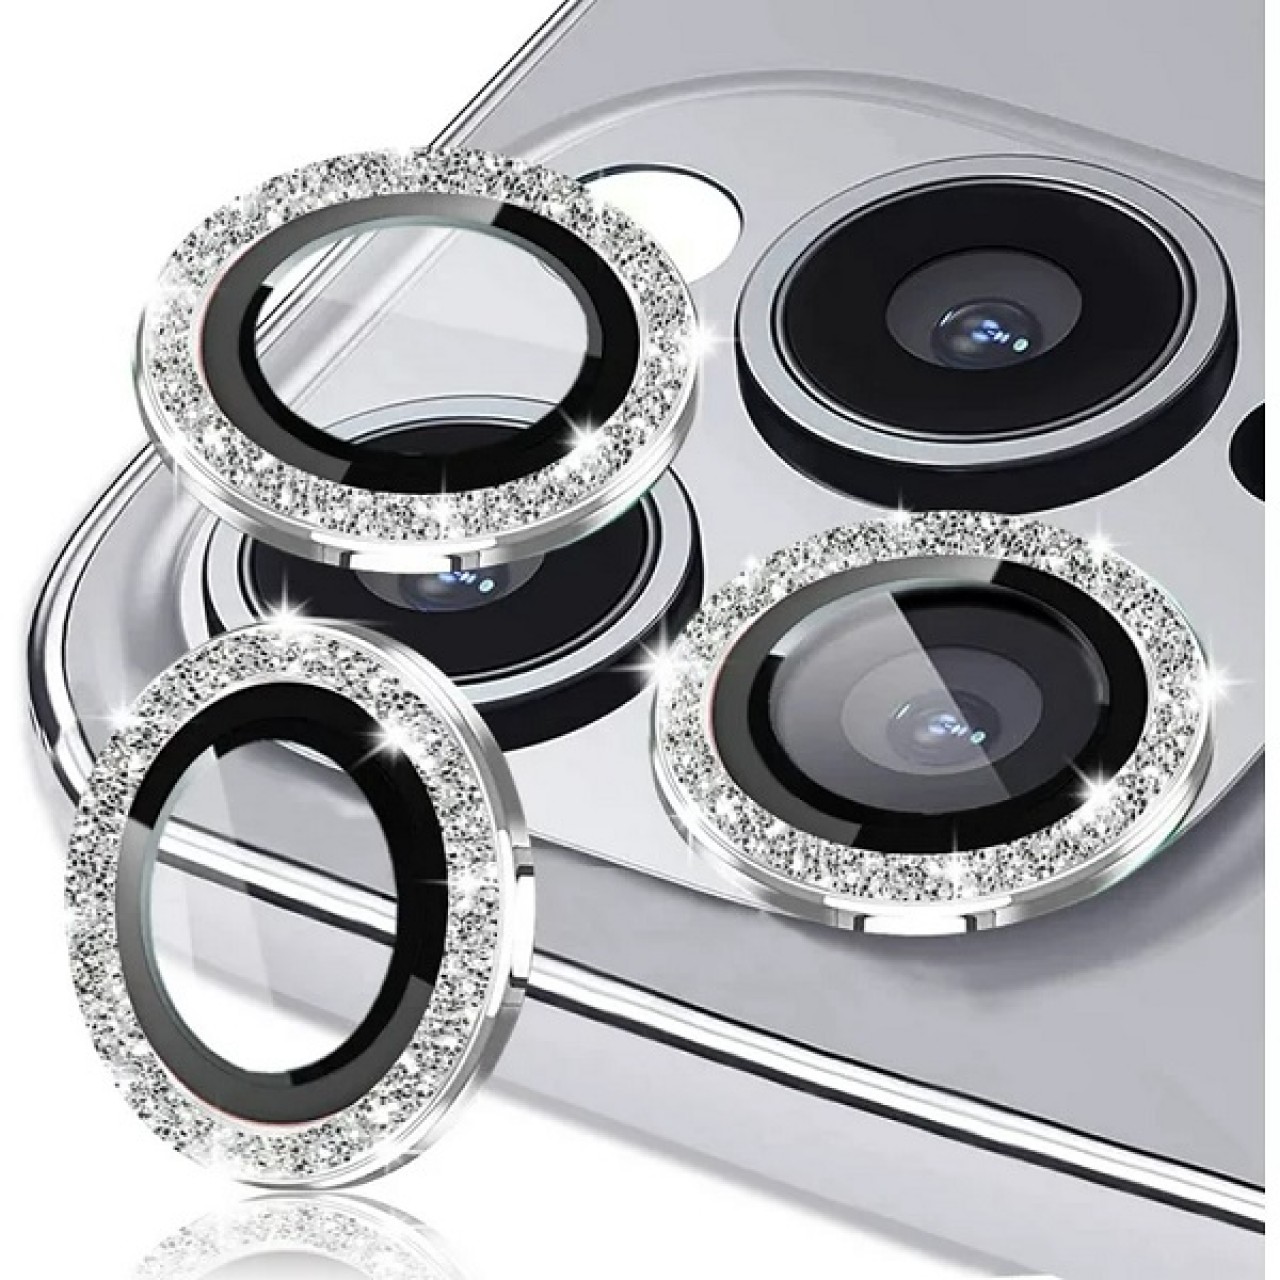 iPhone 11 Pro Max Προστασία Κάμερας Ασημί Strass - Camera Protector Ring Strass Silver